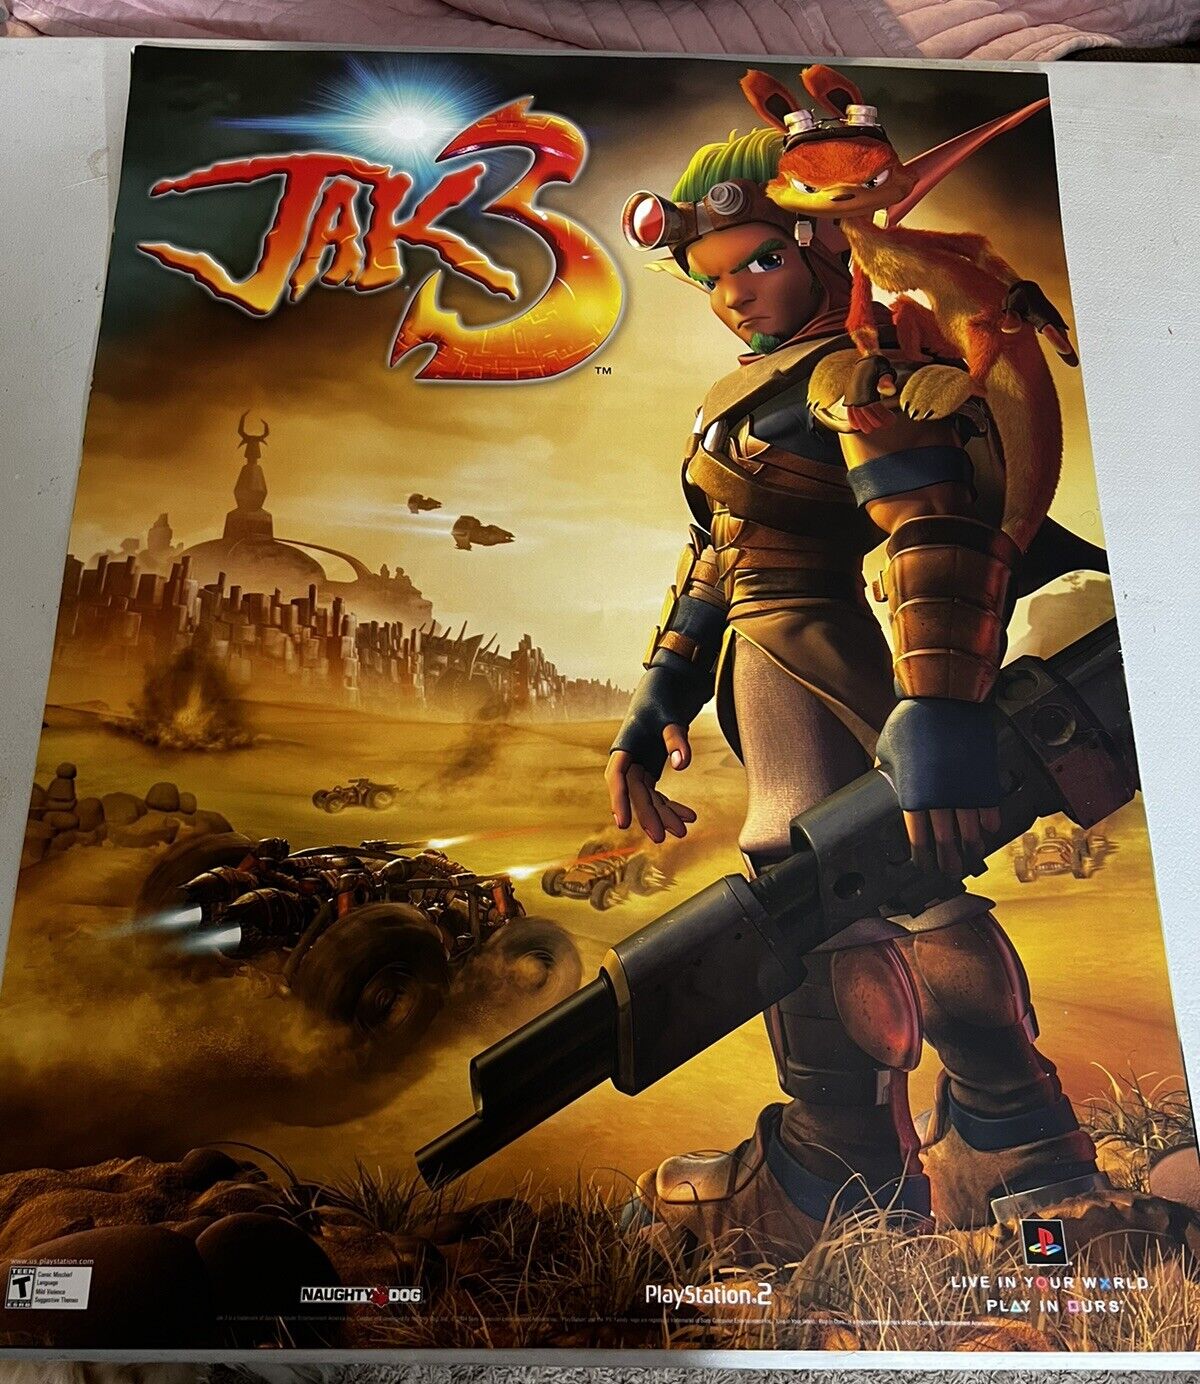 Jak 3 / Ratchet & Clank 2004 Two-Sided Retail Game Store Poster Rare Promo 22x28